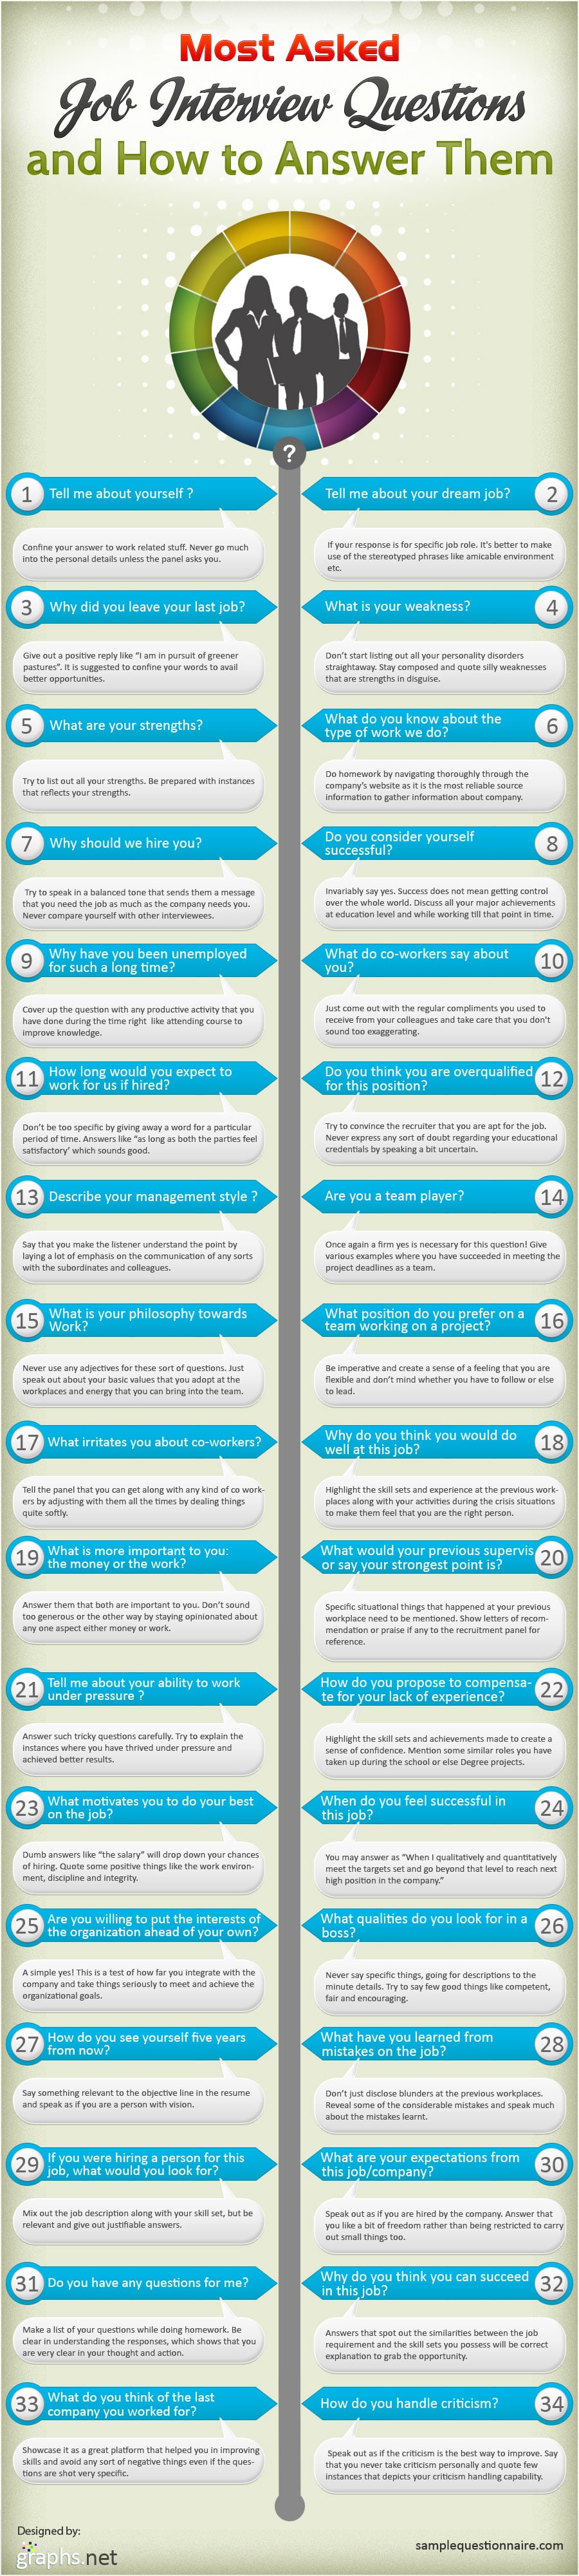 most-asked-job-interview-questions